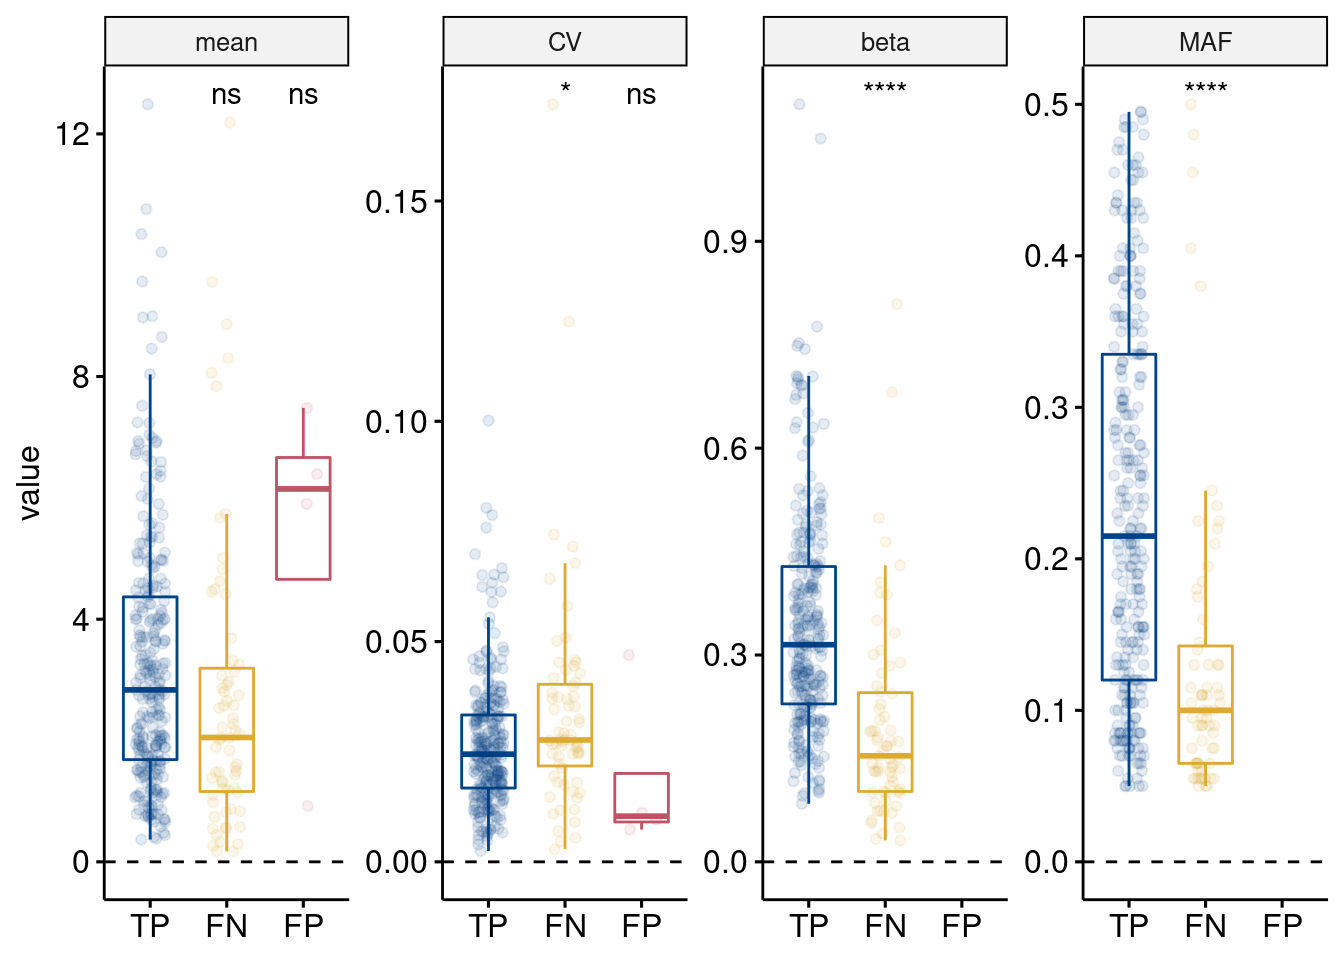 Simulated properties of eGenes with the correct eSNP identified (TP) or not (FN) (FDR<=0.05) and non-eGenes with a significant eQTL hit (FP). Properties are (left to right) simulated gene mean, gene variance (coefficient of variation), eQTL effect size (beta), and eSNP minor allele frequency (MAF). No simulated beta or eSNP MAF for FPs as they were not simulated as eGenes. Results from t-tests compared to TP are shown (ns: p > 0.05; $*$: p <= 0.05; $**$: p <= 0.01; $***$: p <= 0.001; $****$: p <= 0.0001)